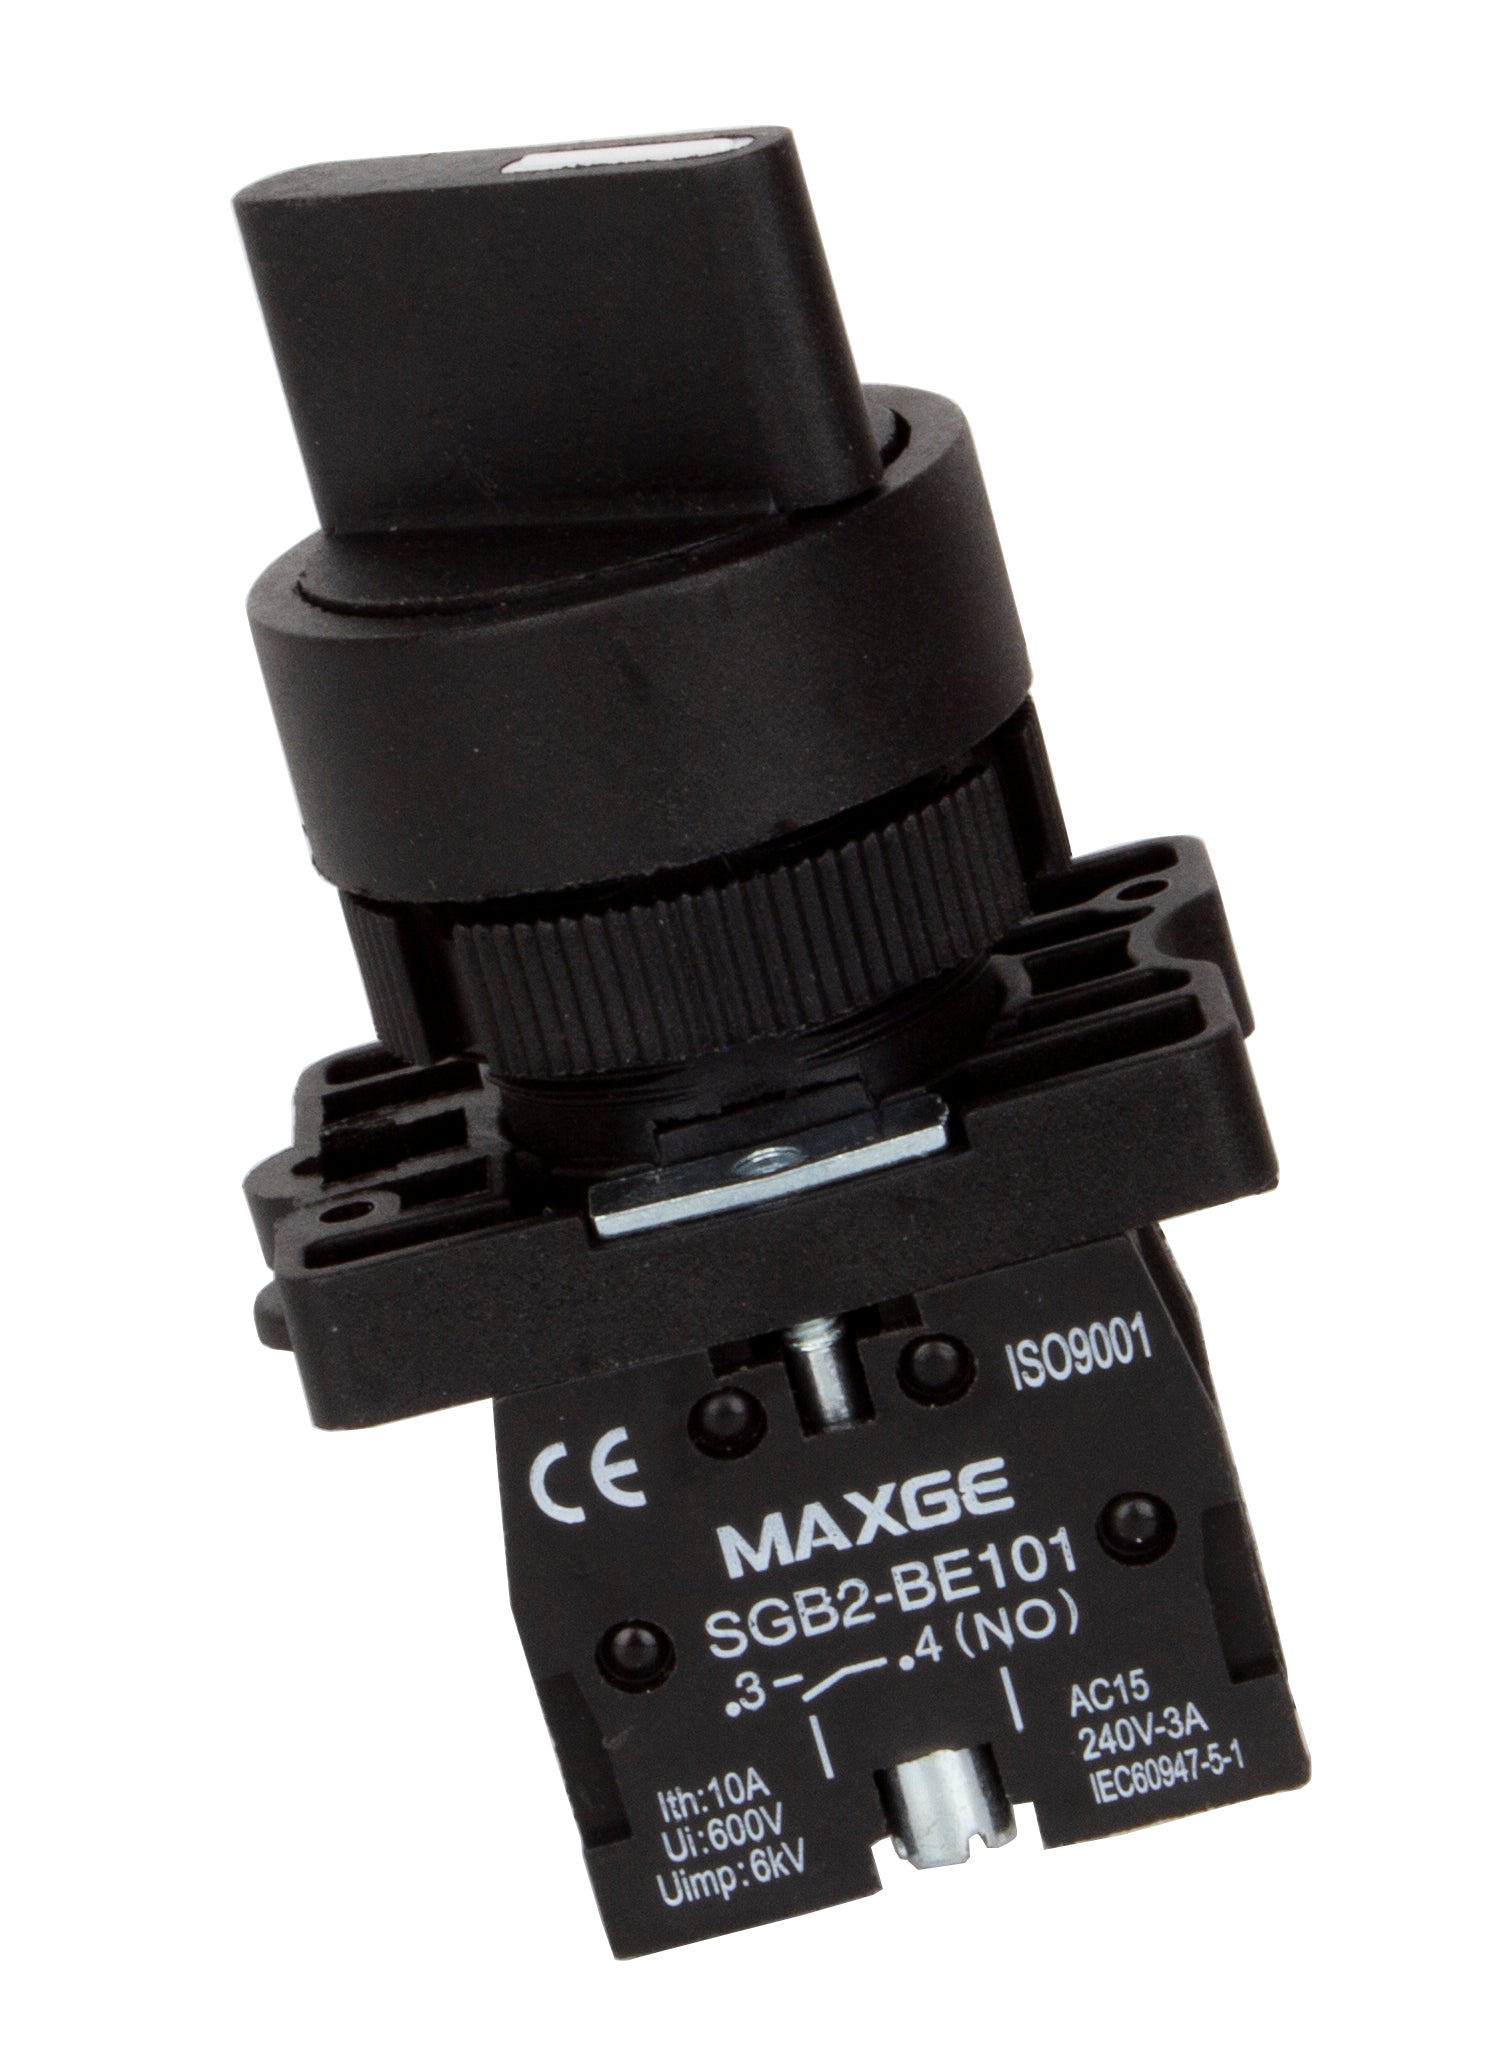 TRB-BD73, 2 x NO, 3 Position Toggle Switch BLACK, Right ON, Centre = OFF, Left Biased, 3 Amp @ 240VAC, Plastic/Metal, IEC60947-5-1